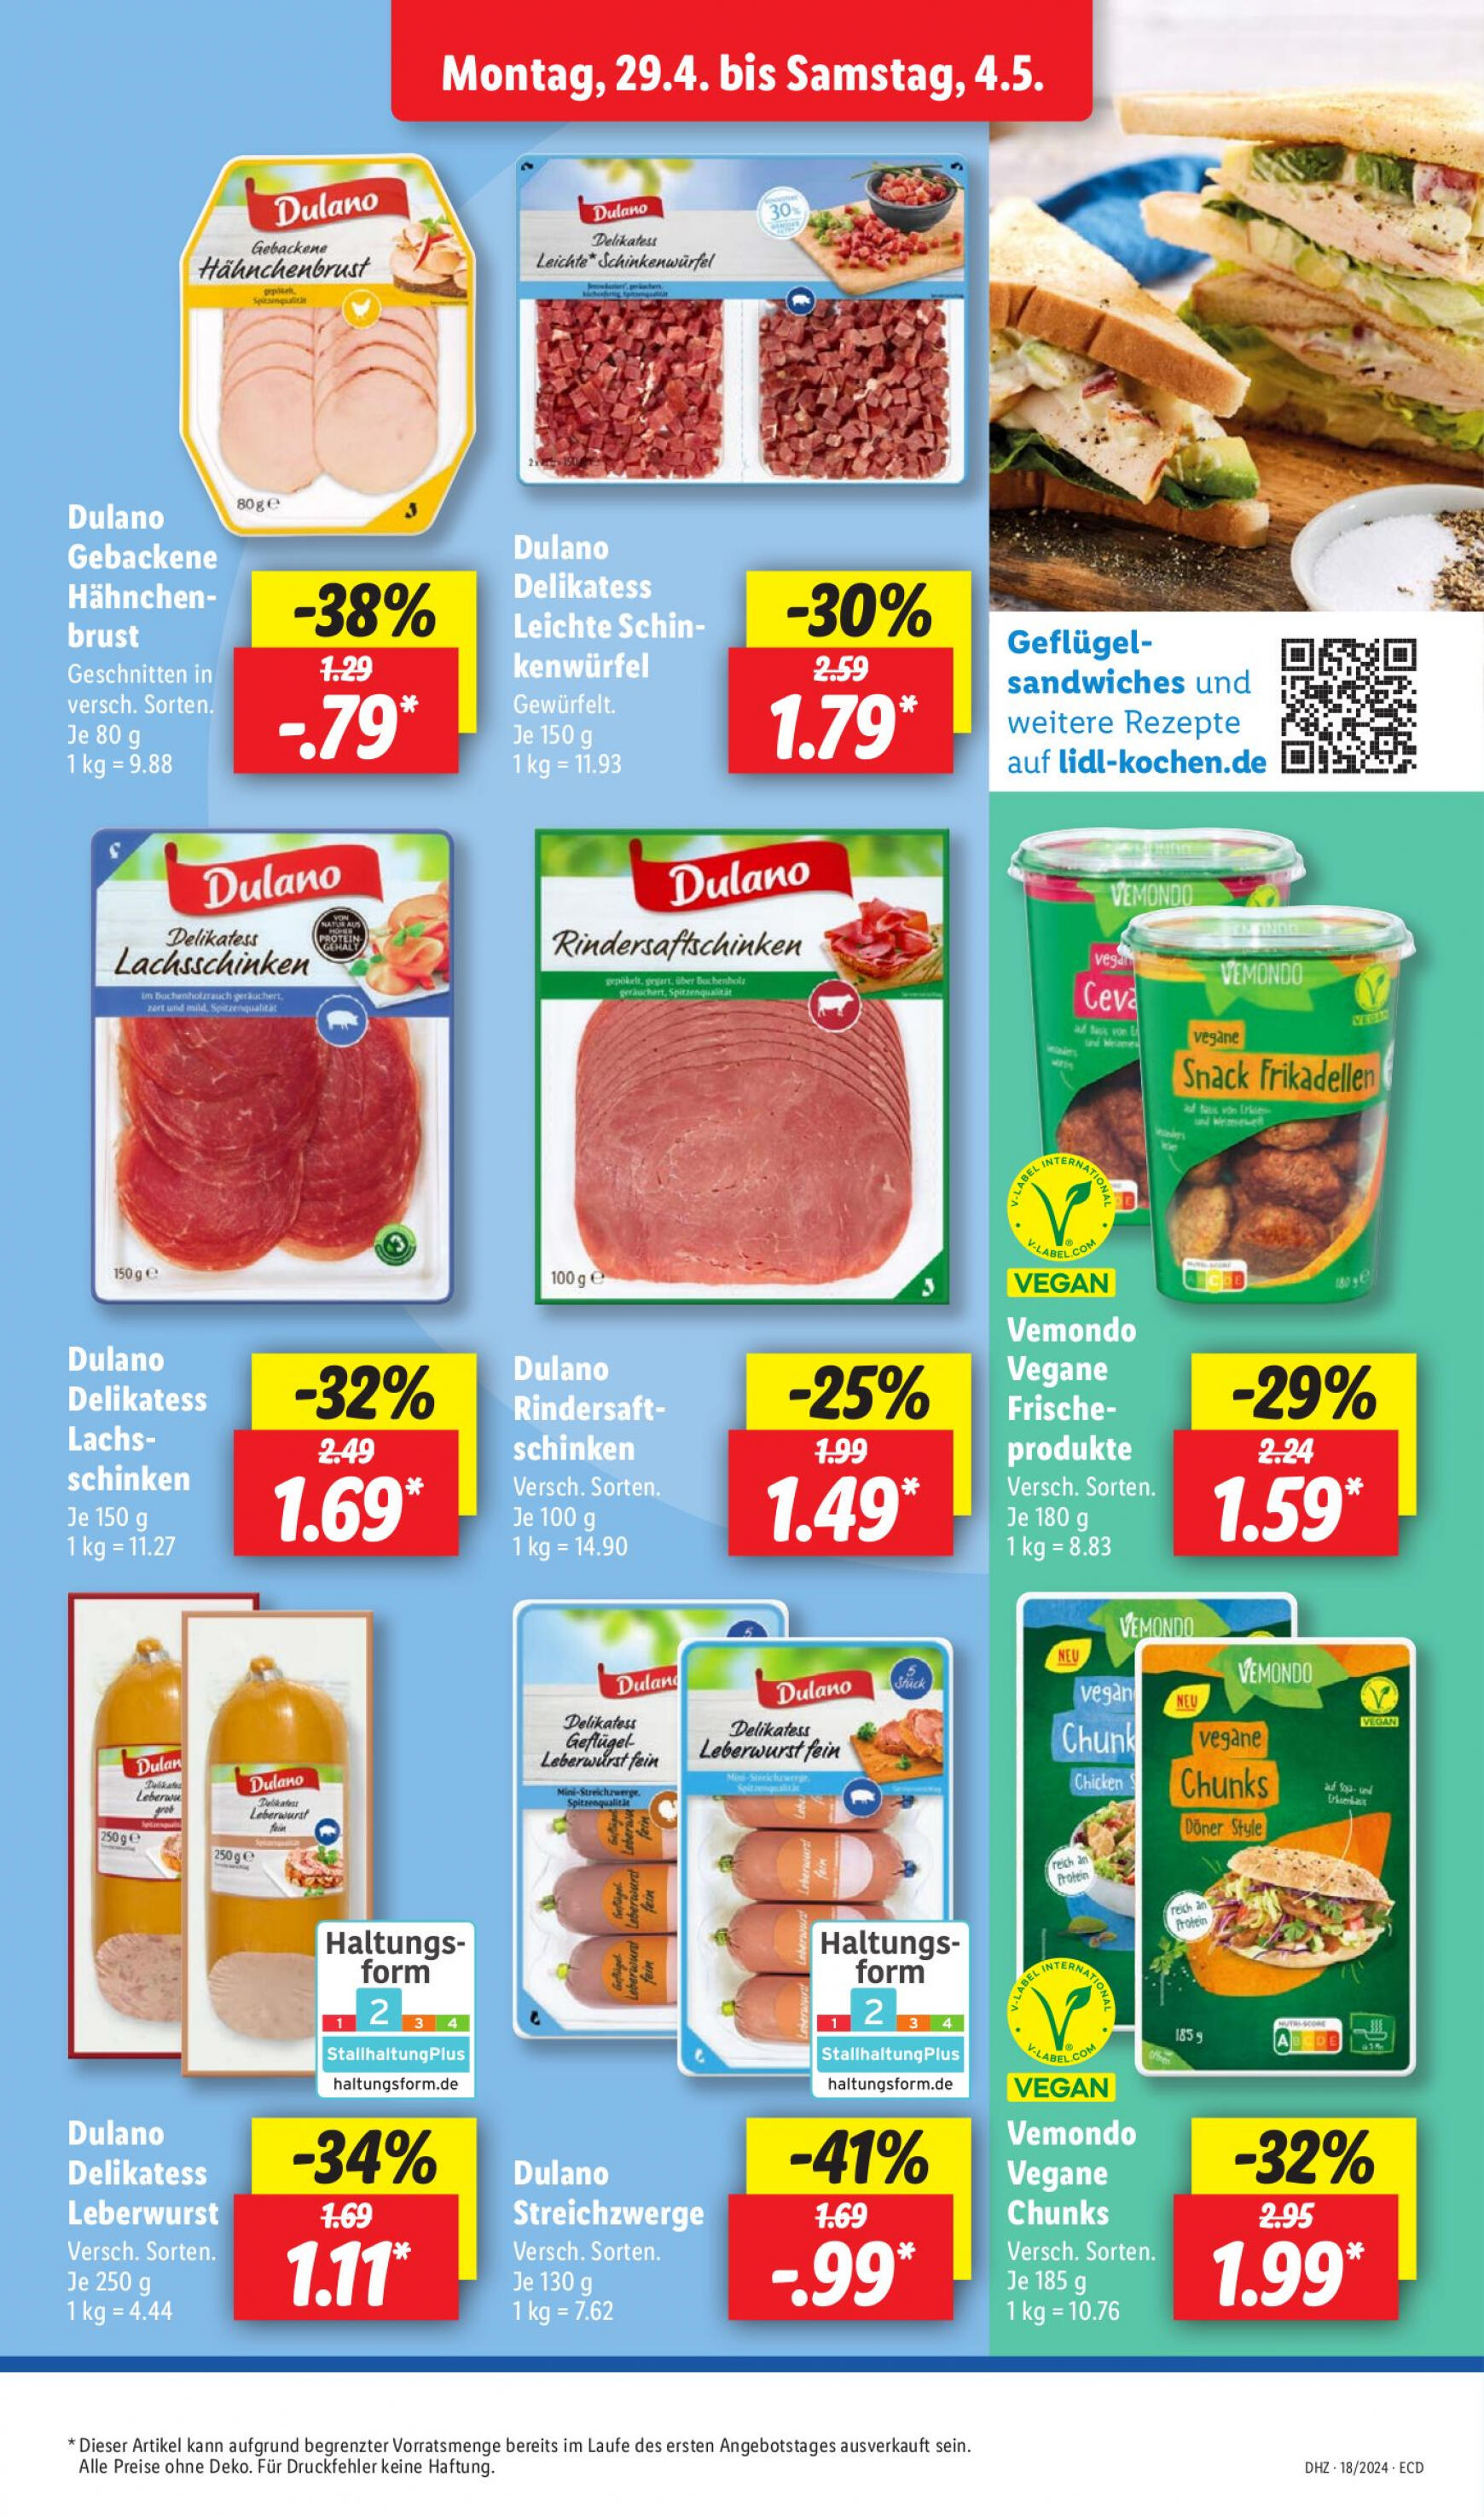 lidl - Flyer Lidl aktuell 29.04. - 04.05. - page: 9